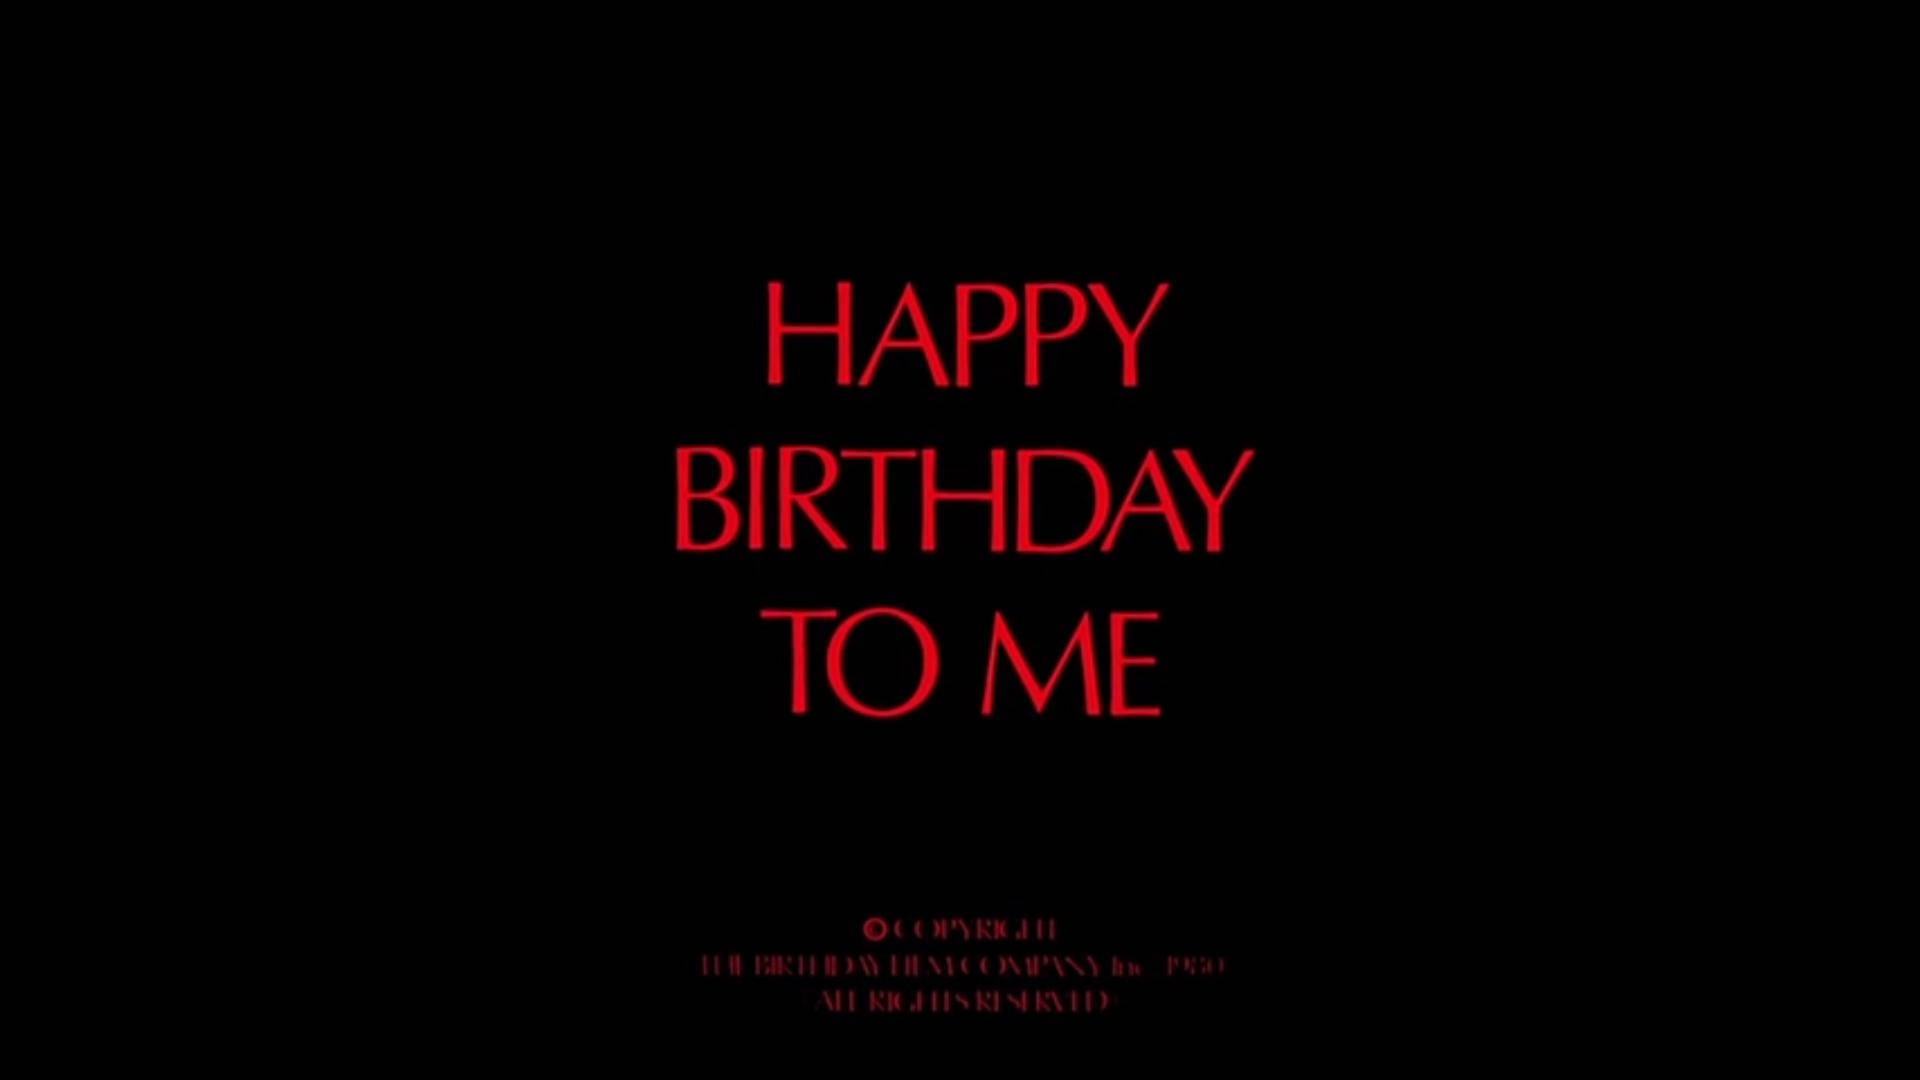 Free Happy Birthday To Me Wallpaper Downloads, [100+] Happy Birthday To Me  Wallpapers for FREE 